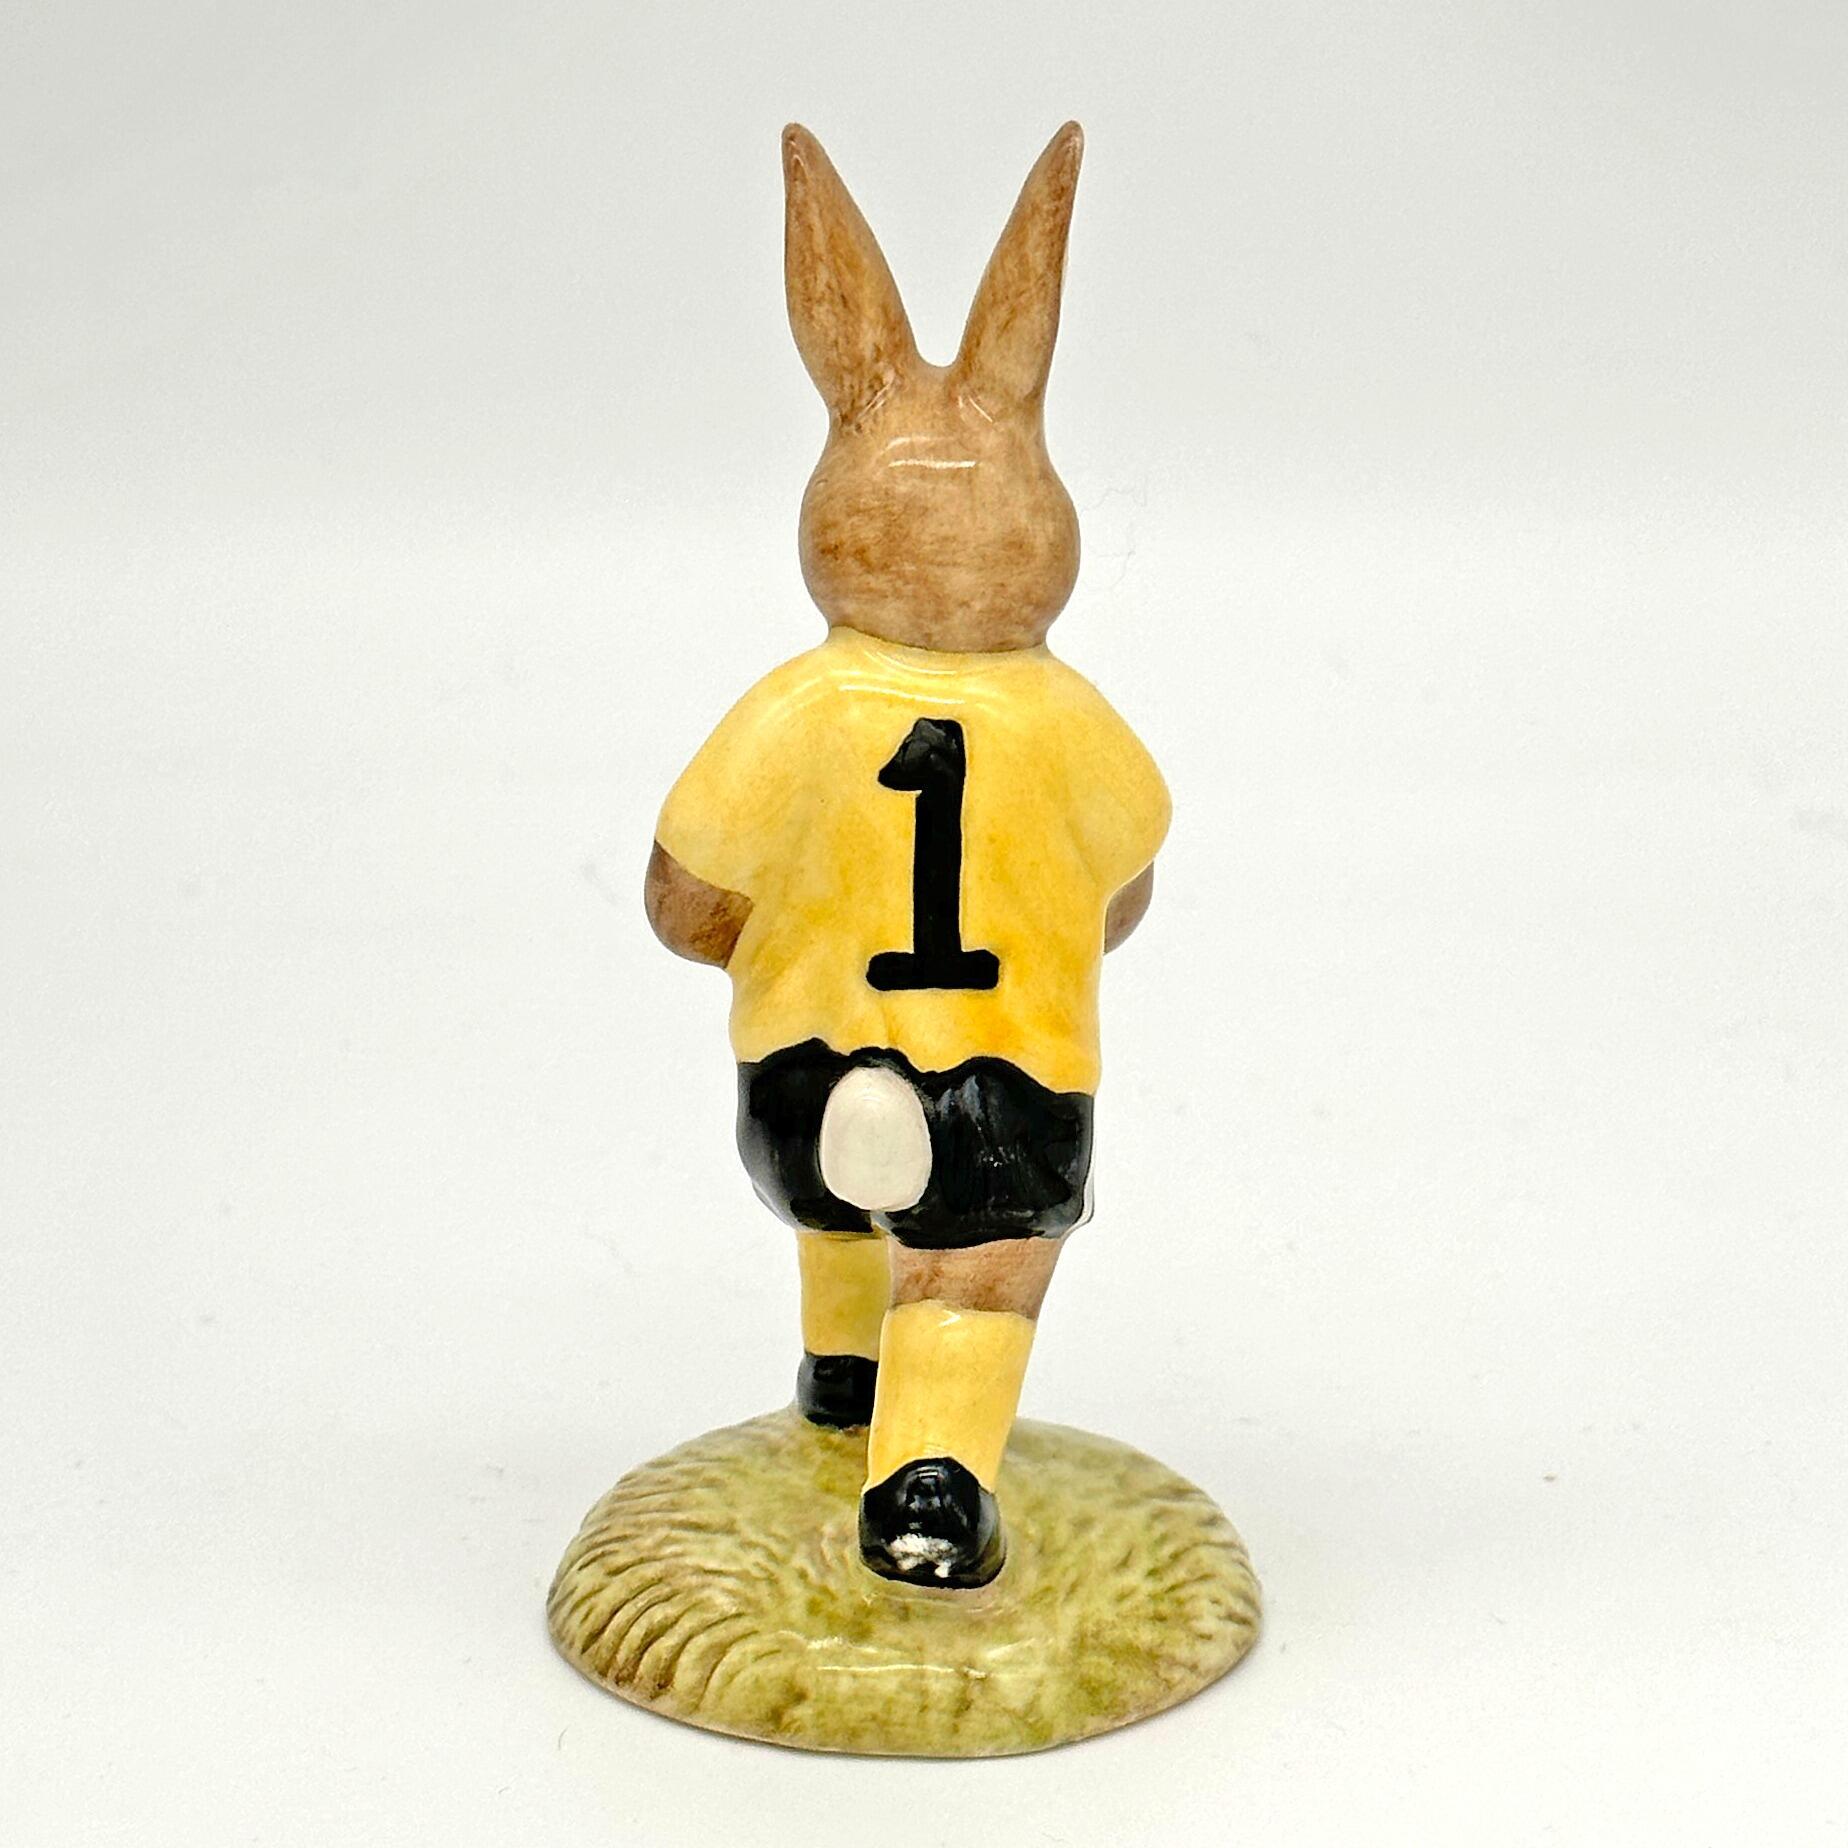 Royal Doulton Bunnykins figure - DB120 Goalkeeper in Yellow and Black - back